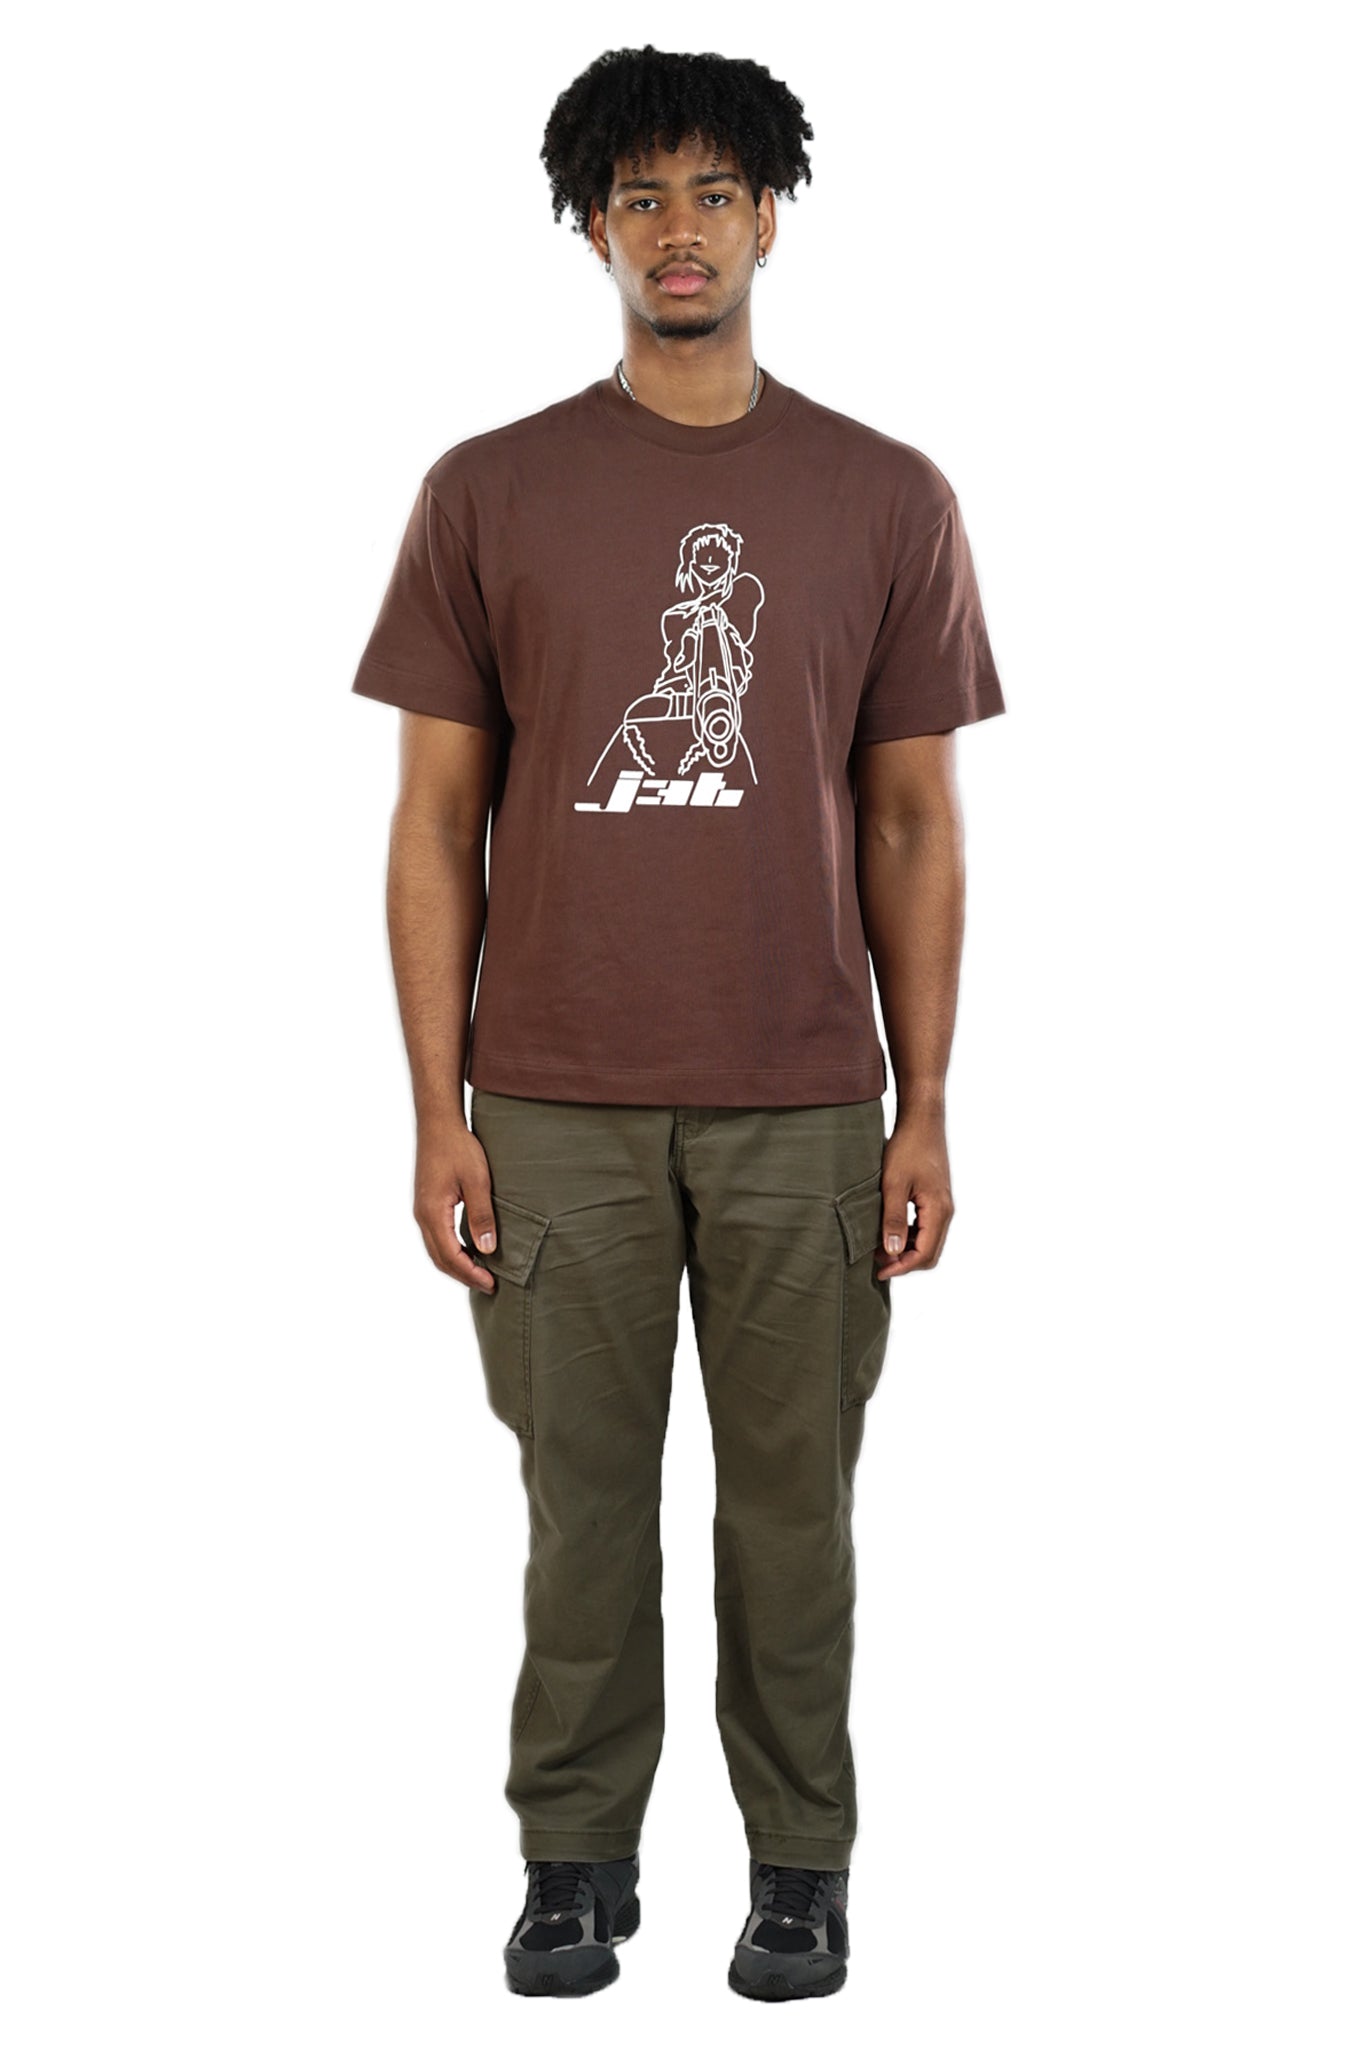 6'2" male wearing Remy Tee brown in a size large - front angle